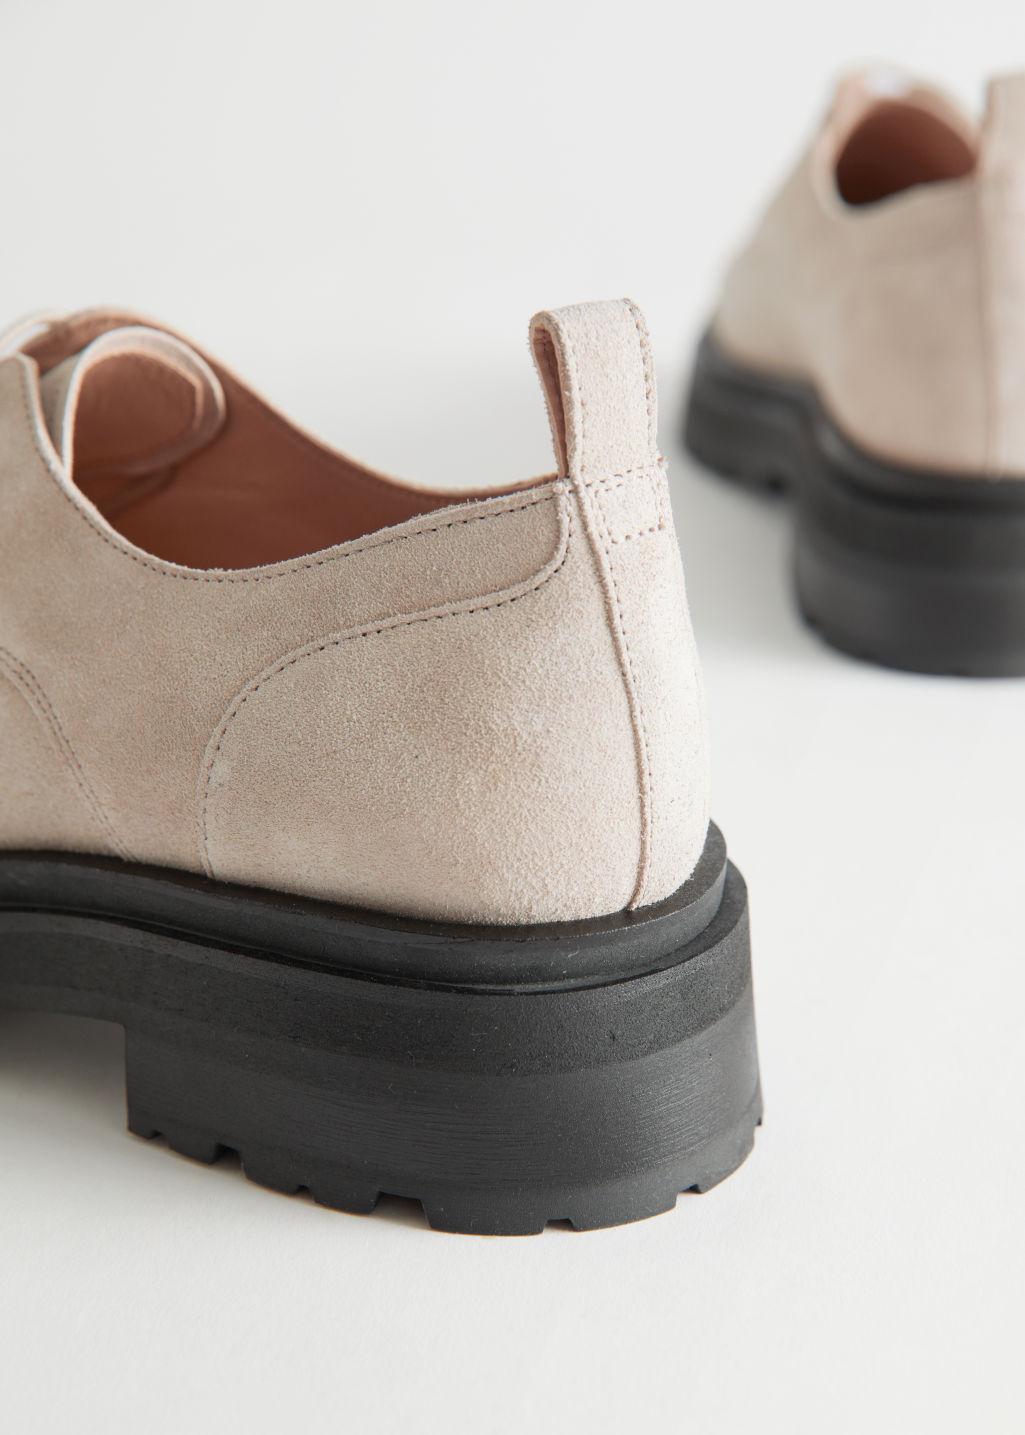 & Other Stories Chunky Suede Derby Shoes in Natural | Lyst Canada